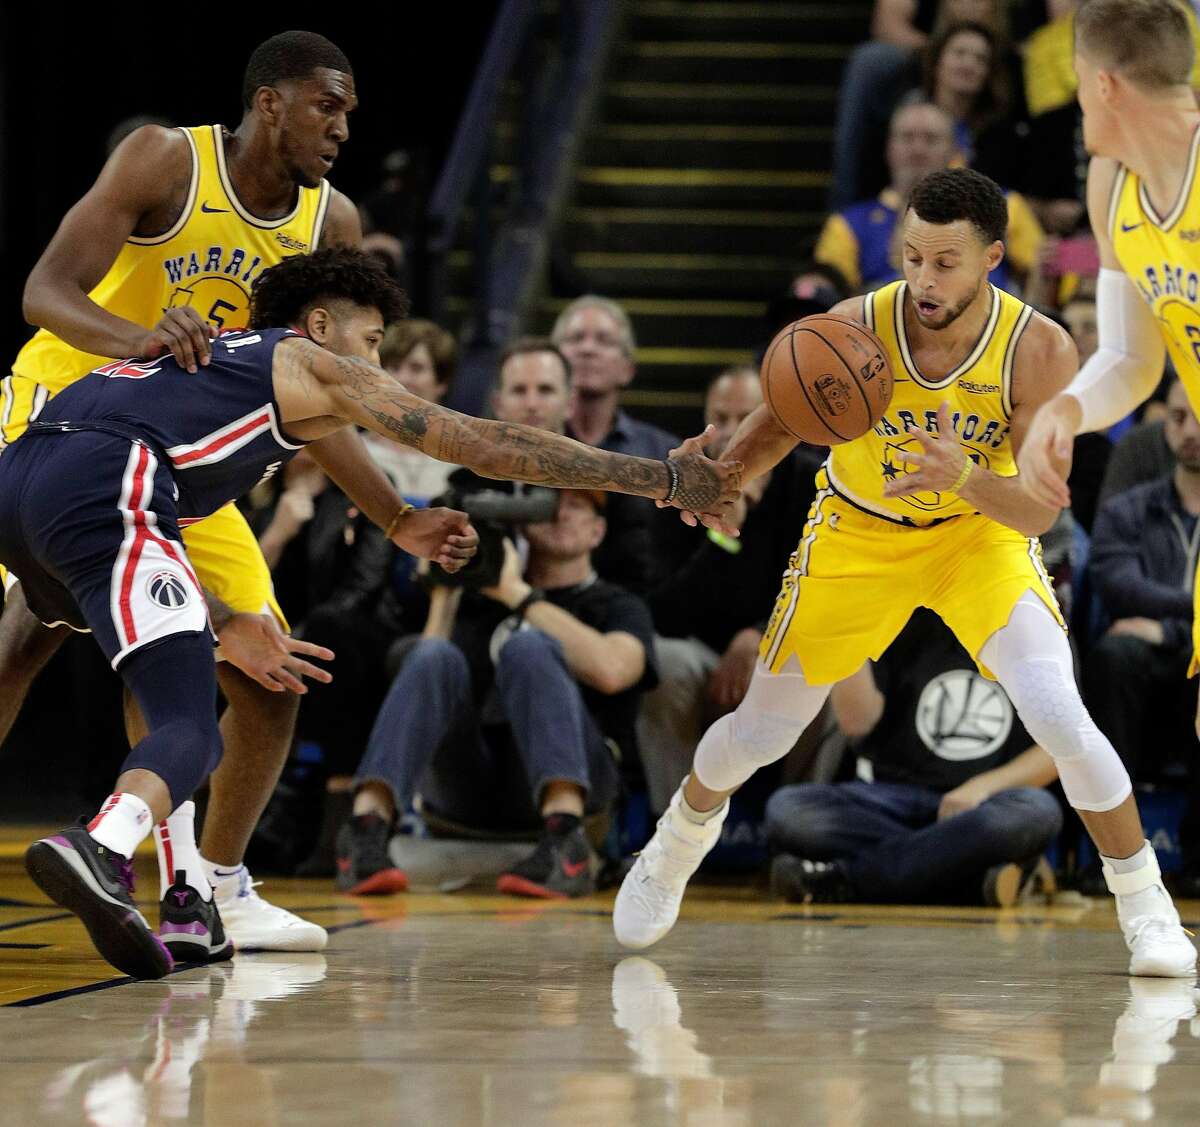 Stephen Curry (30) steals the ball from Kelly Oubre Jr., (12) as the Golden State Warriors played the Washington Wizards at Oracle Arena in Oakland on Wednesday, Oct. 24, 2018.